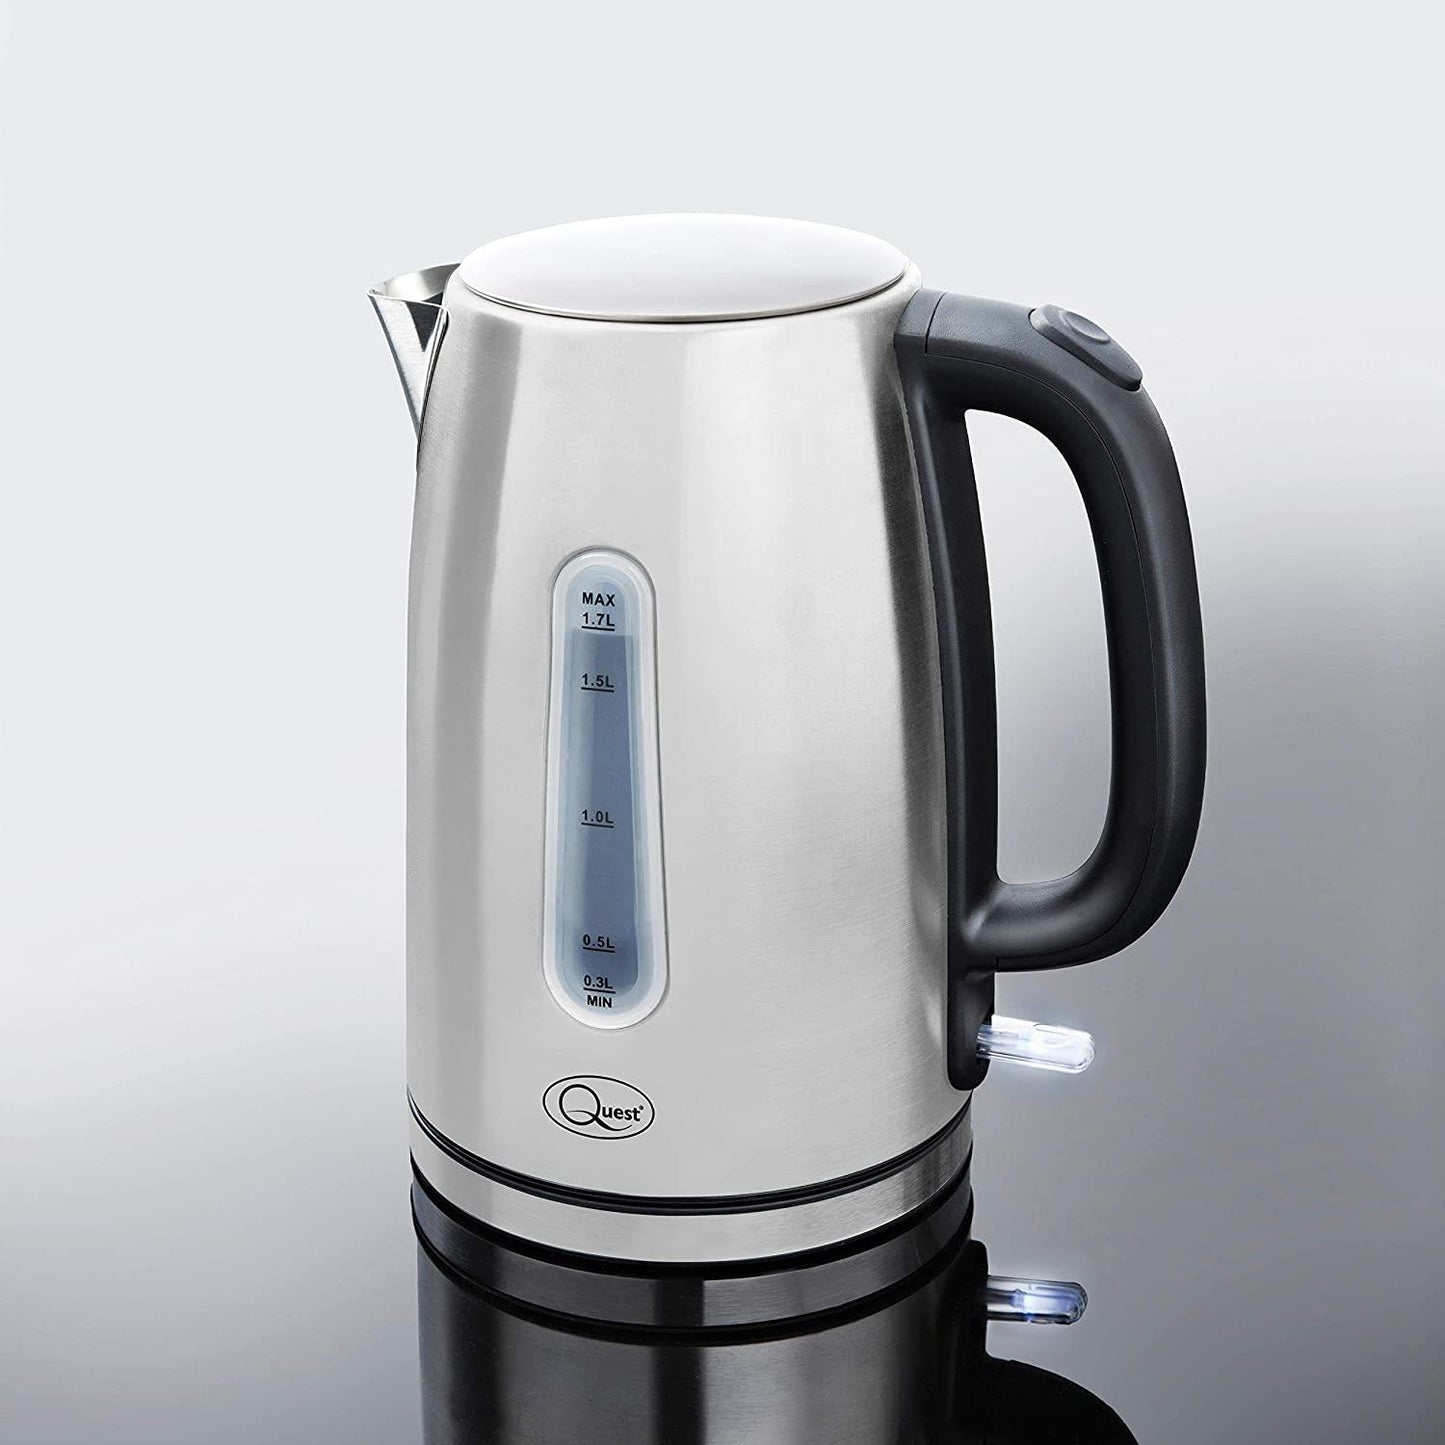 Quest Rapid Boil Full Stainless Steel Kettle 1.7L (Carton of 6)